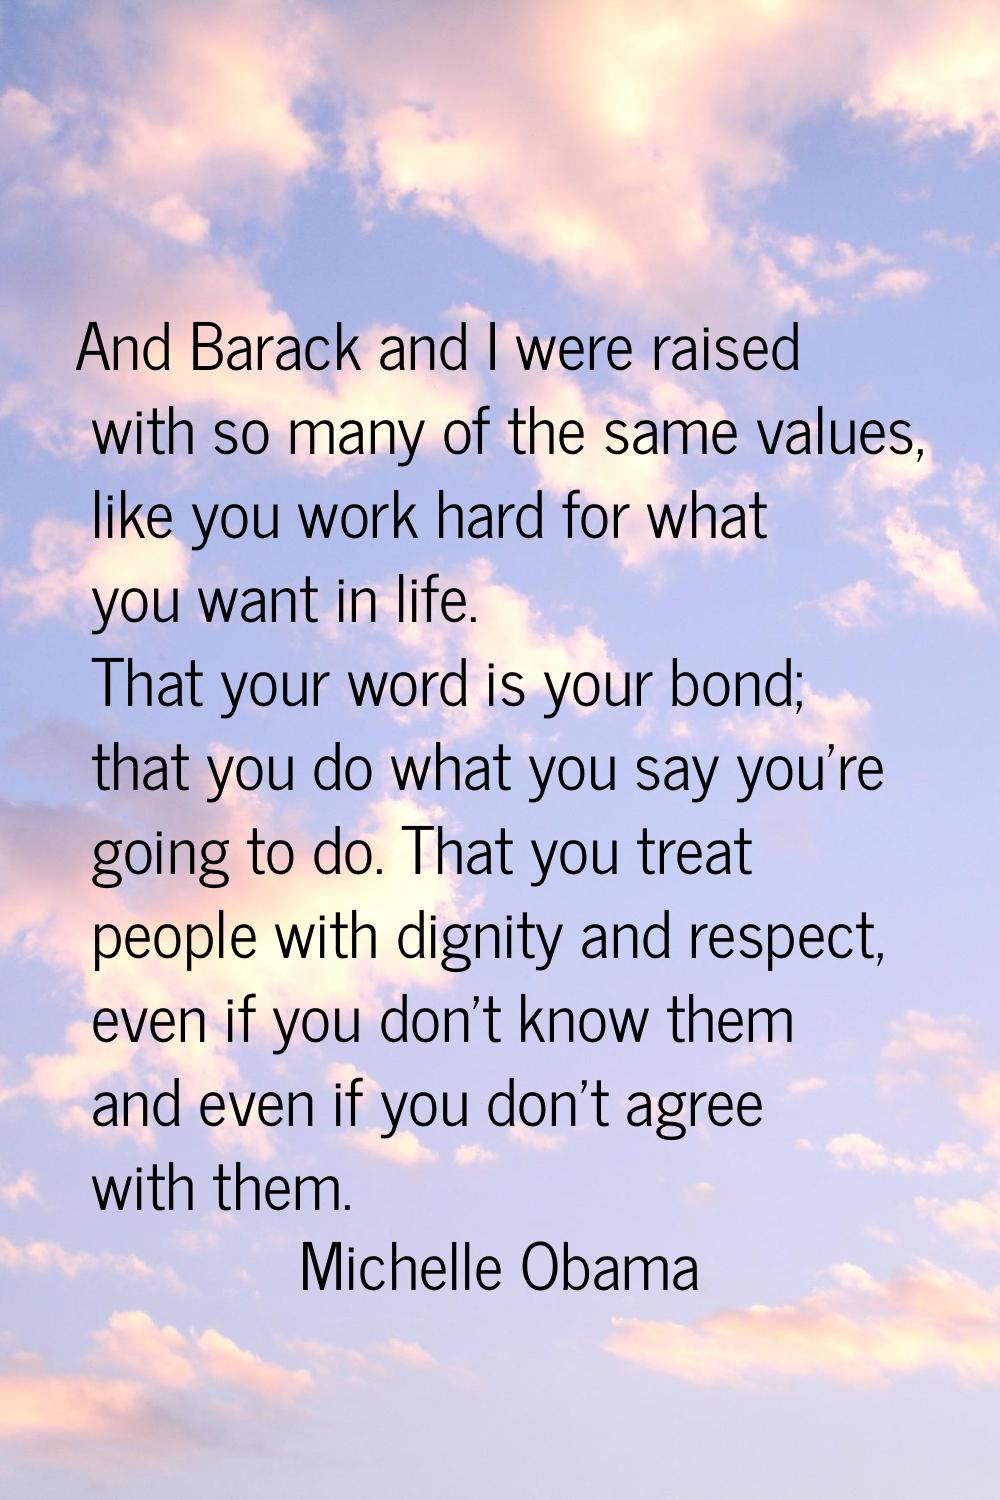 And Barack and I were raised with so many of the same values, like you work hard for what you want 